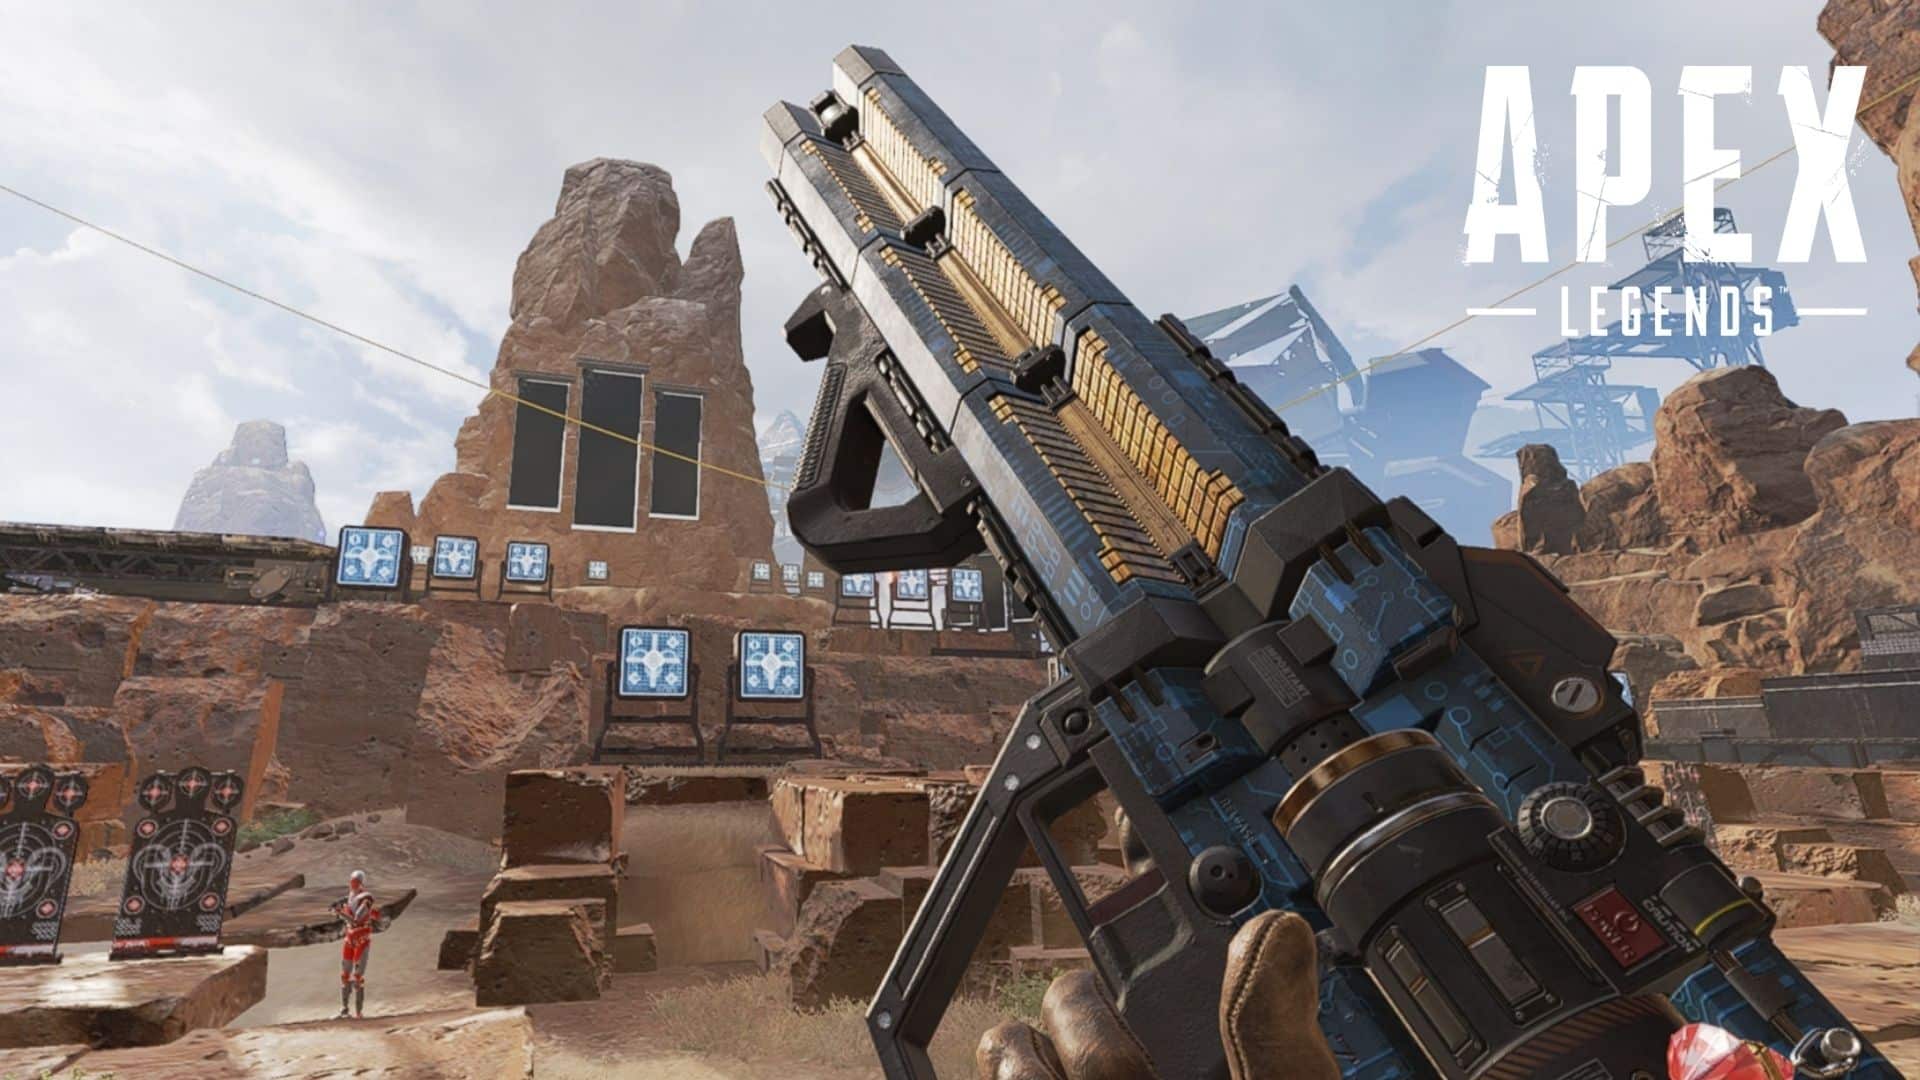 Havoc being pointed to the sky in Apex Legends